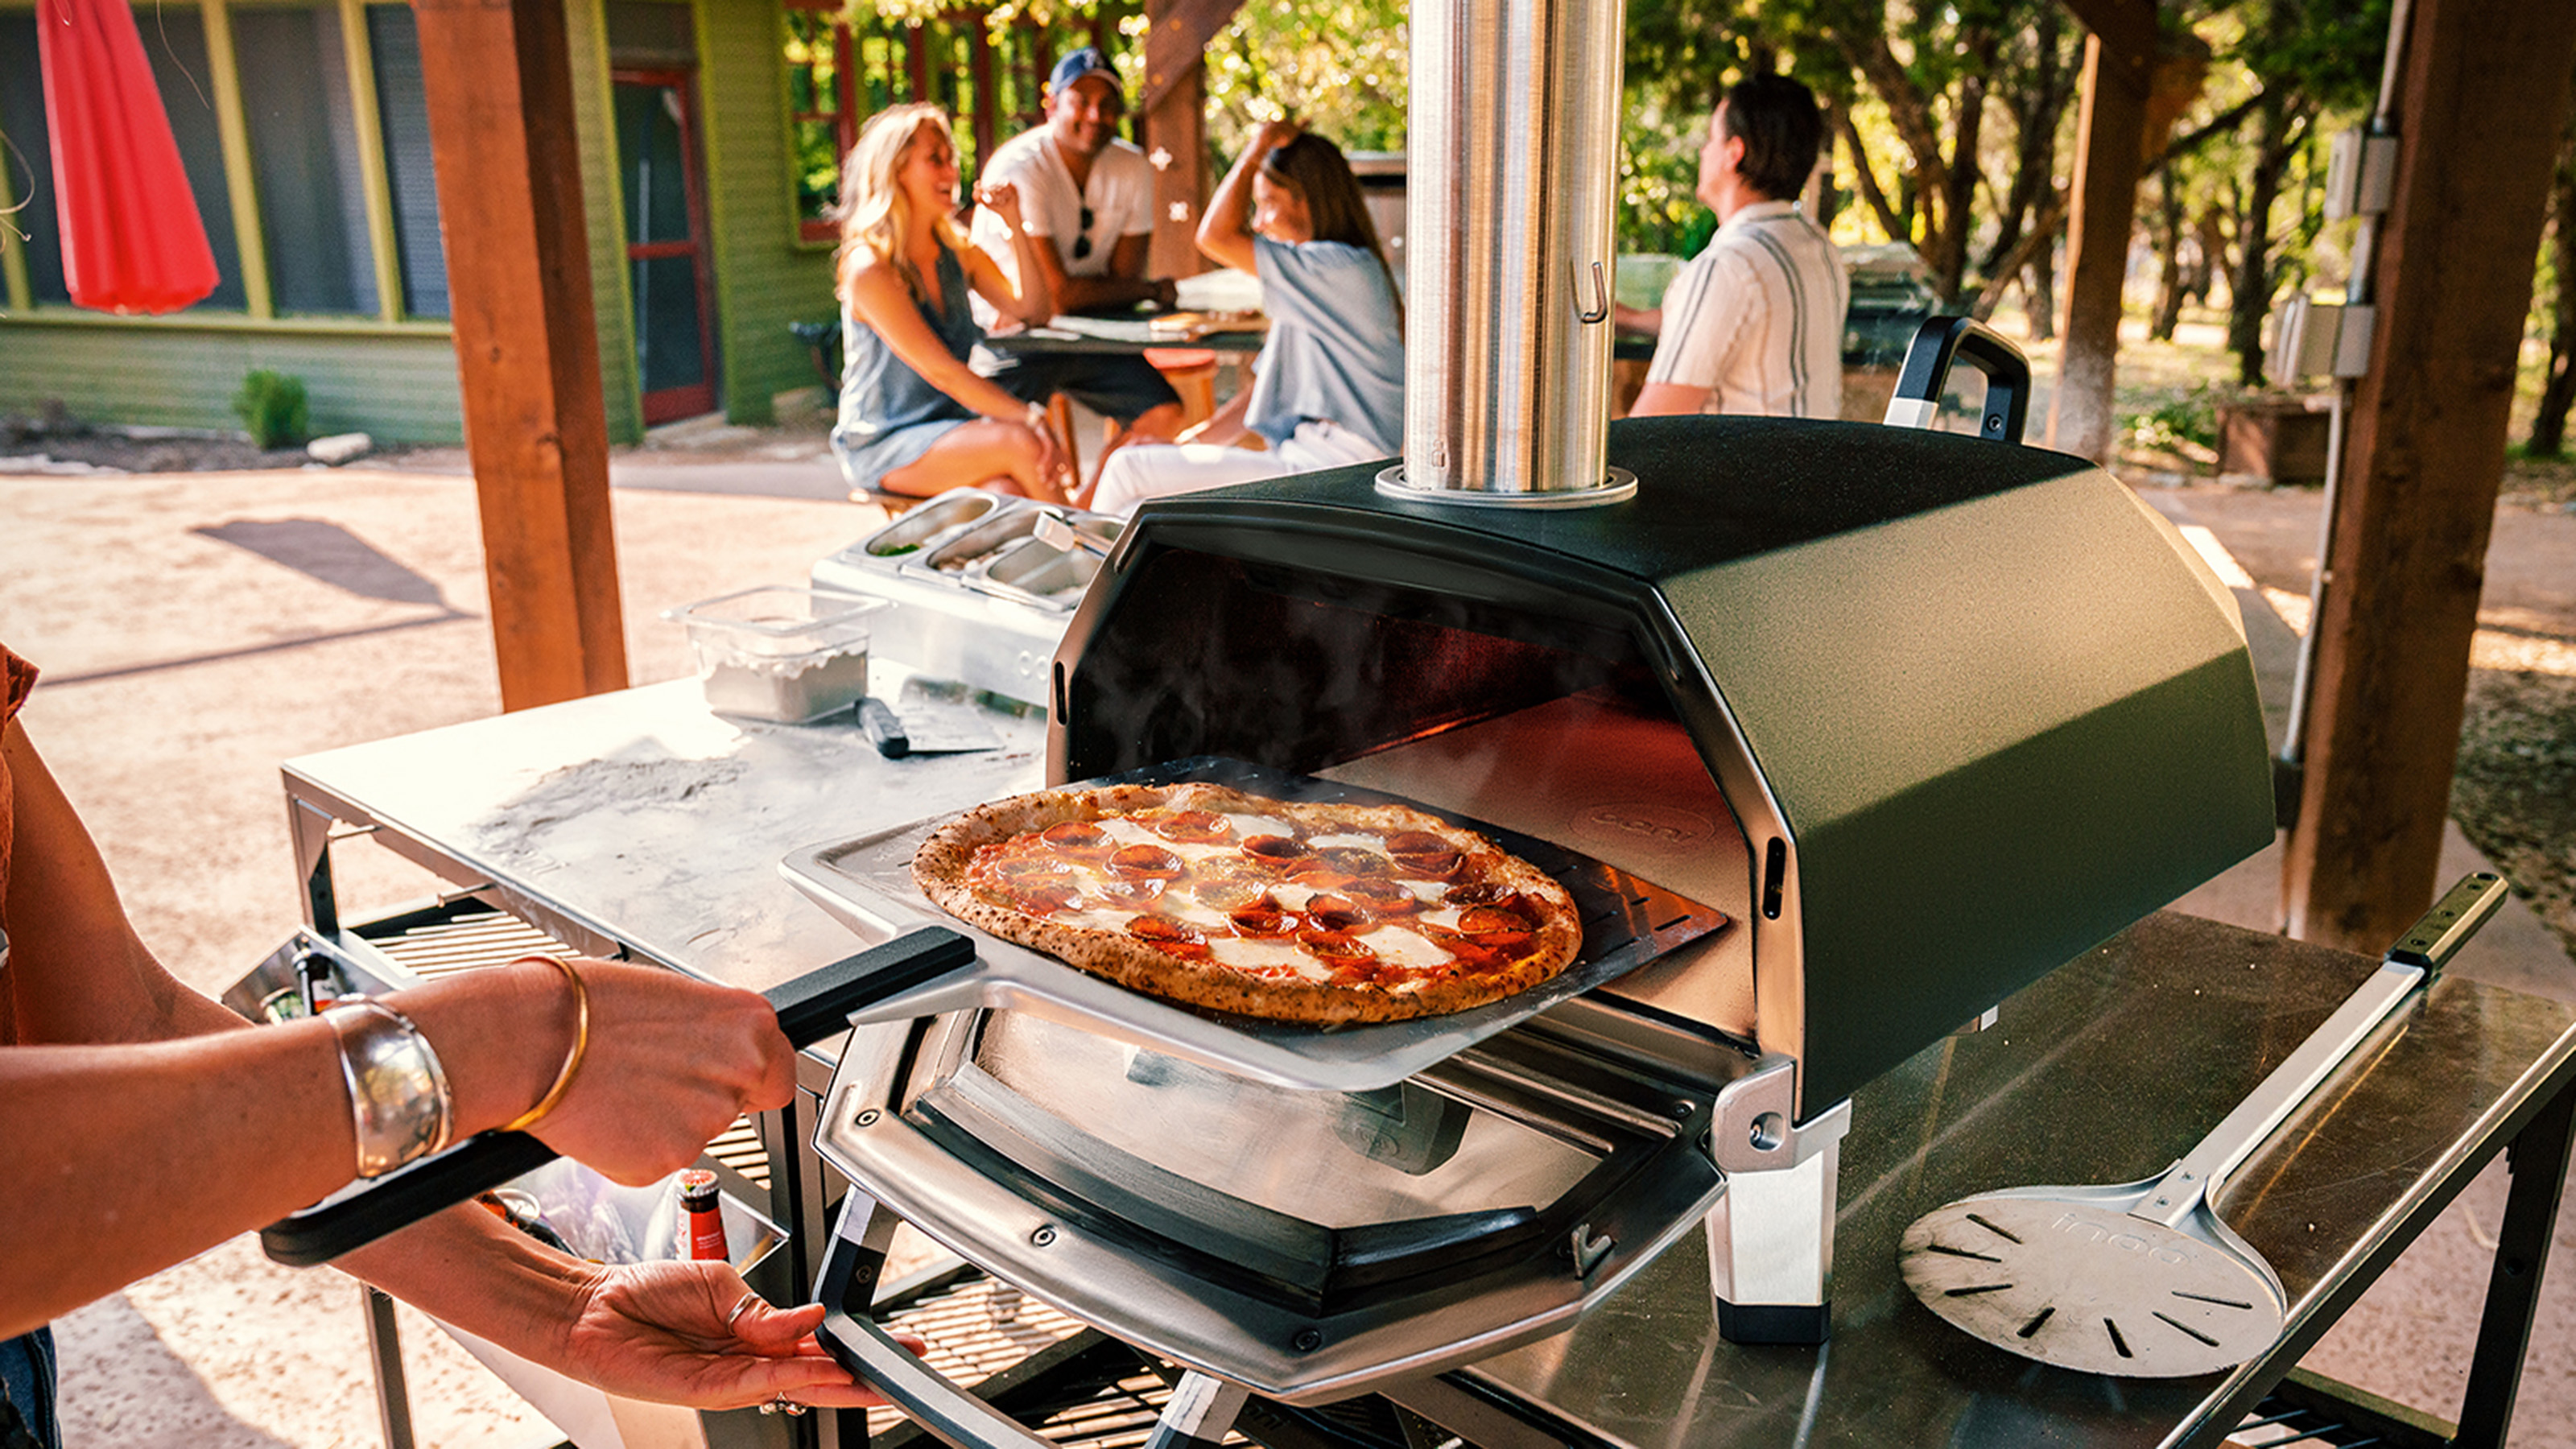 The Ooni pizza oven: everything you need to know - Creative Gardens